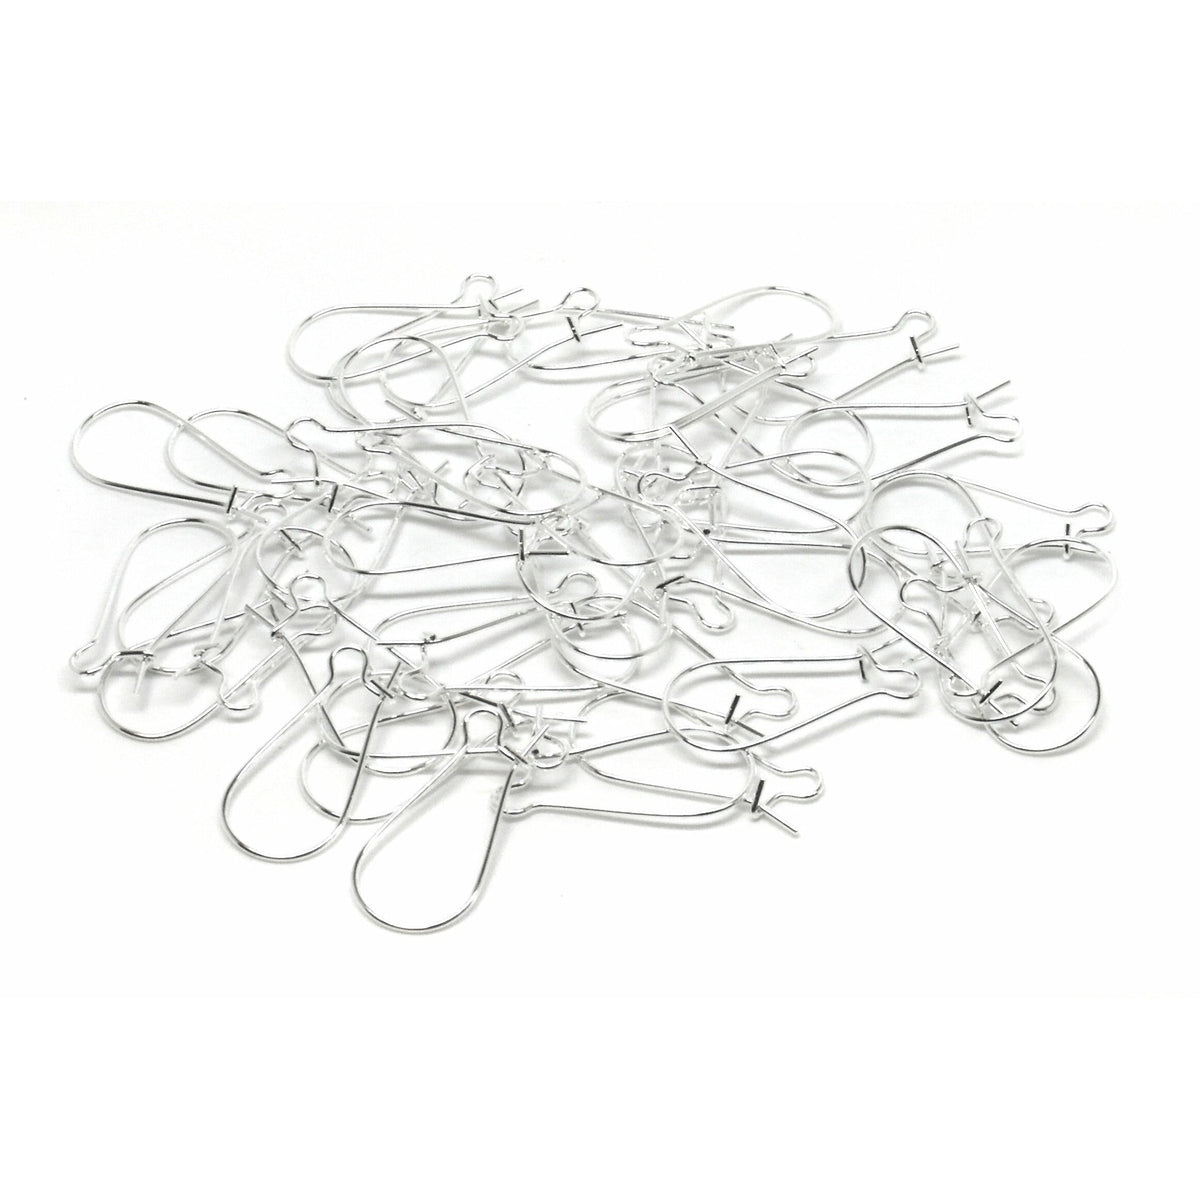 16mm Plastic Earring Hooks with 304 Stainless Steel Beads - Antique Silver  - 10pcs